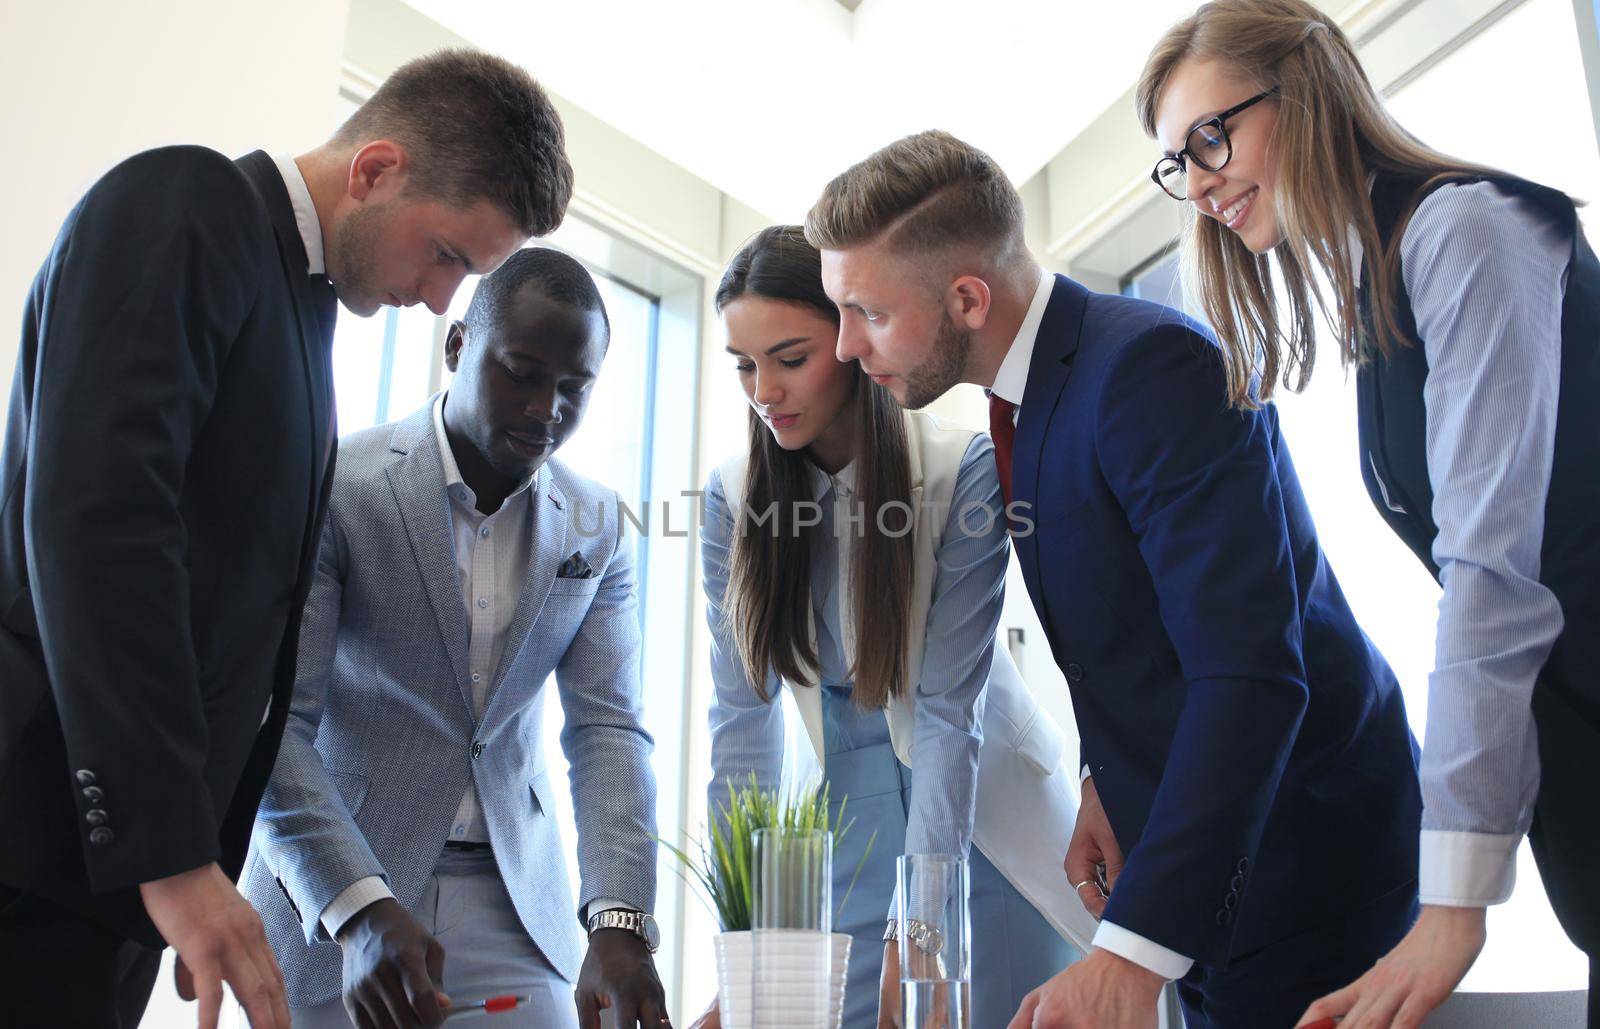 Business team discussing together business plans in office